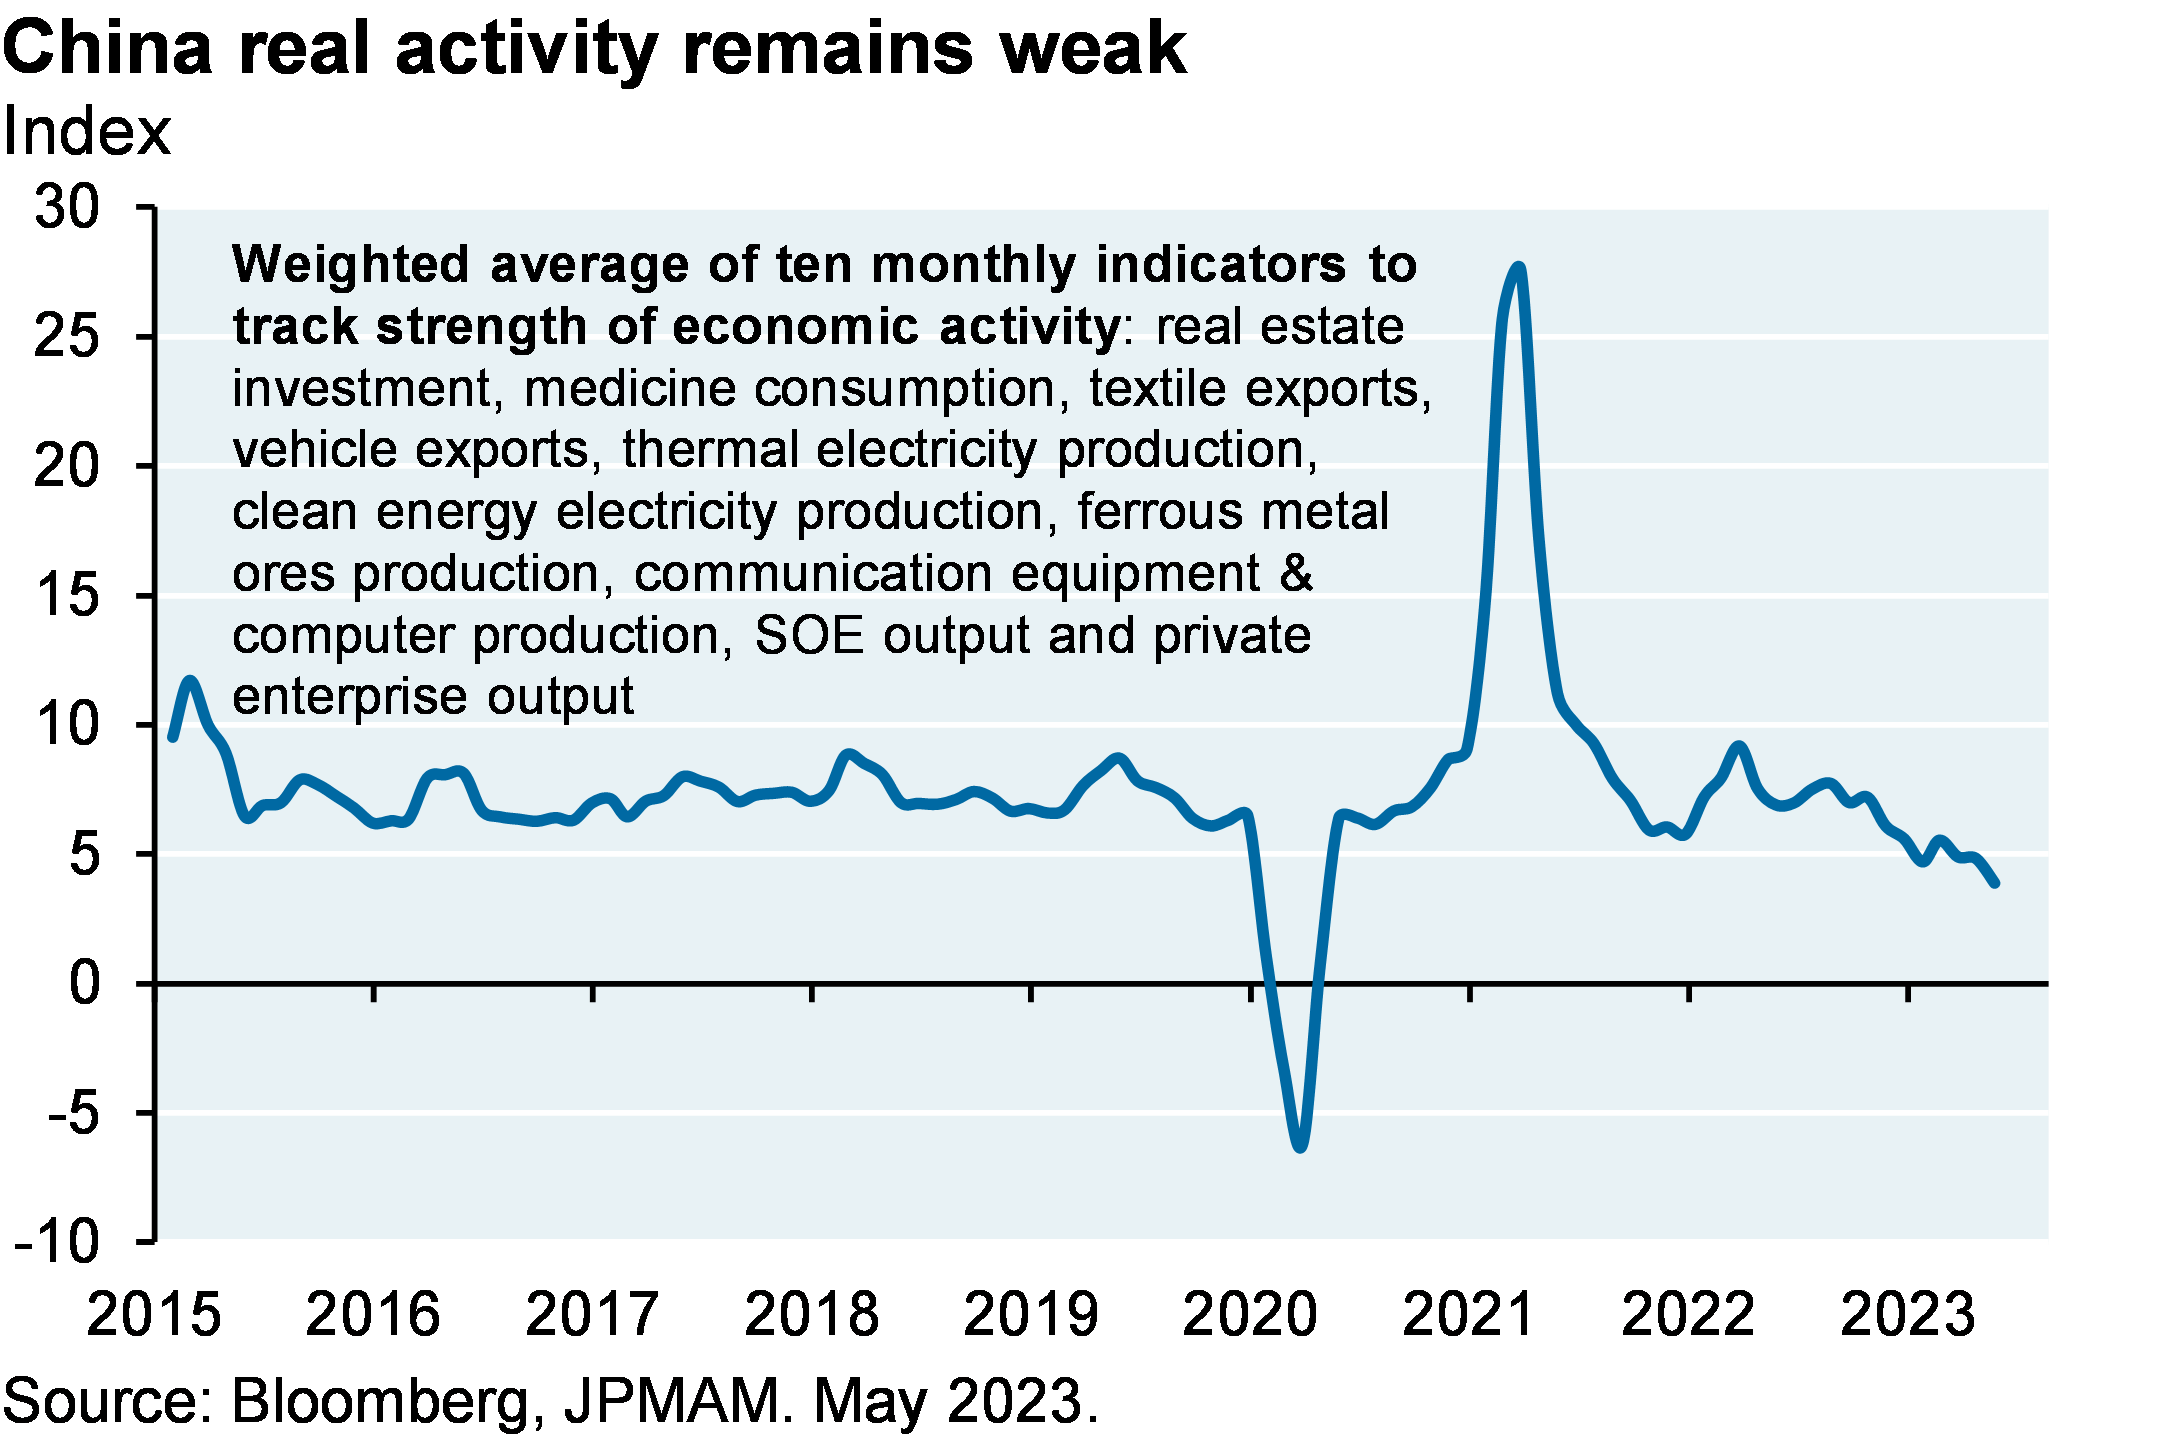 Line chart shows the weighted average of 10 monthly indicators to track the strength of economic activity in China from 2015 to current. There was a drop in activity at the beginning of 2020, followed by a very large spike in 2021. Since the spike in 2021, the index has declined to below historical trend.